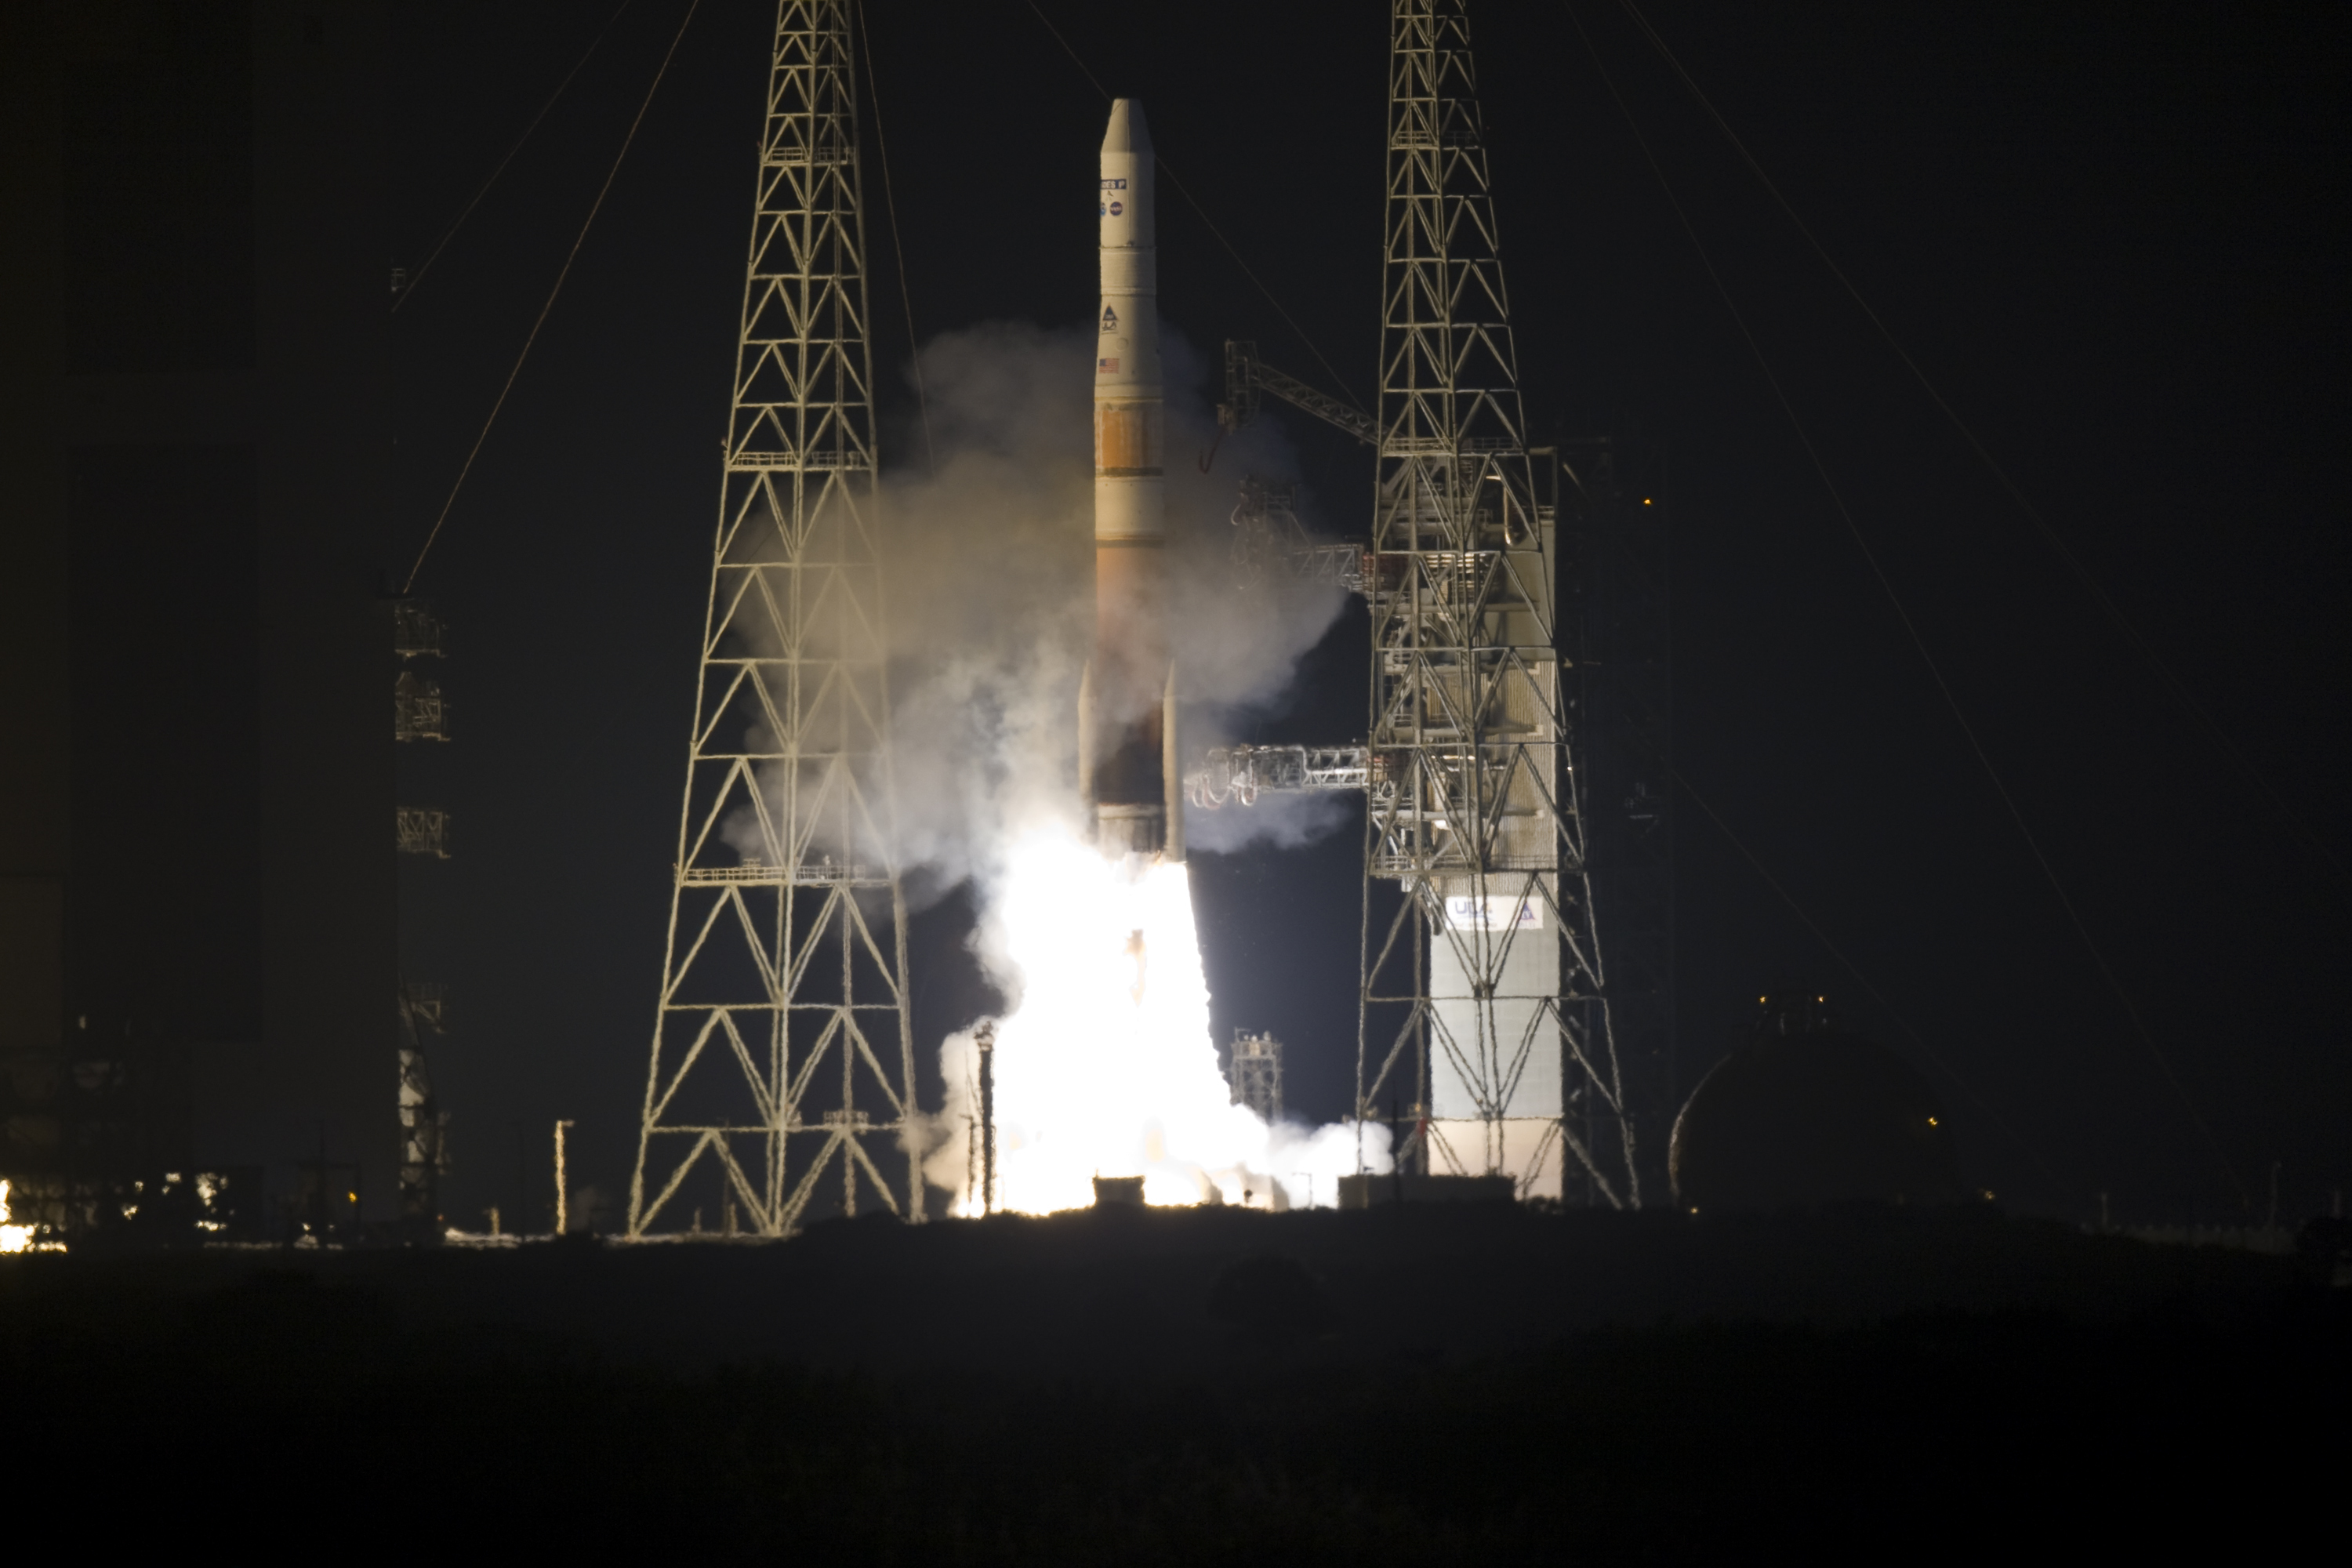 GOES-P Satellite Launches - related image preview